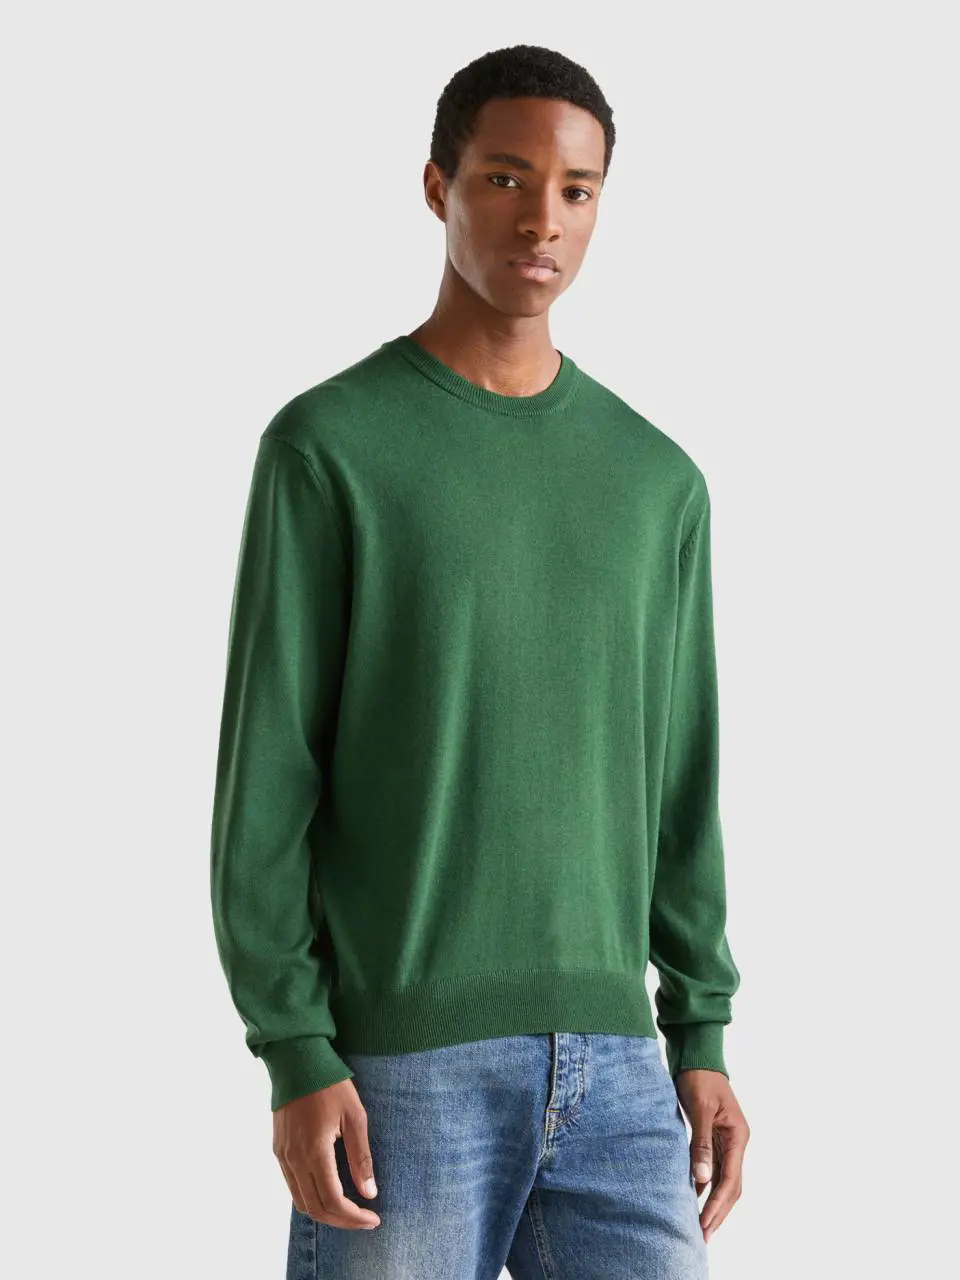 Benetton cotton and wool crew neck sweater. 1